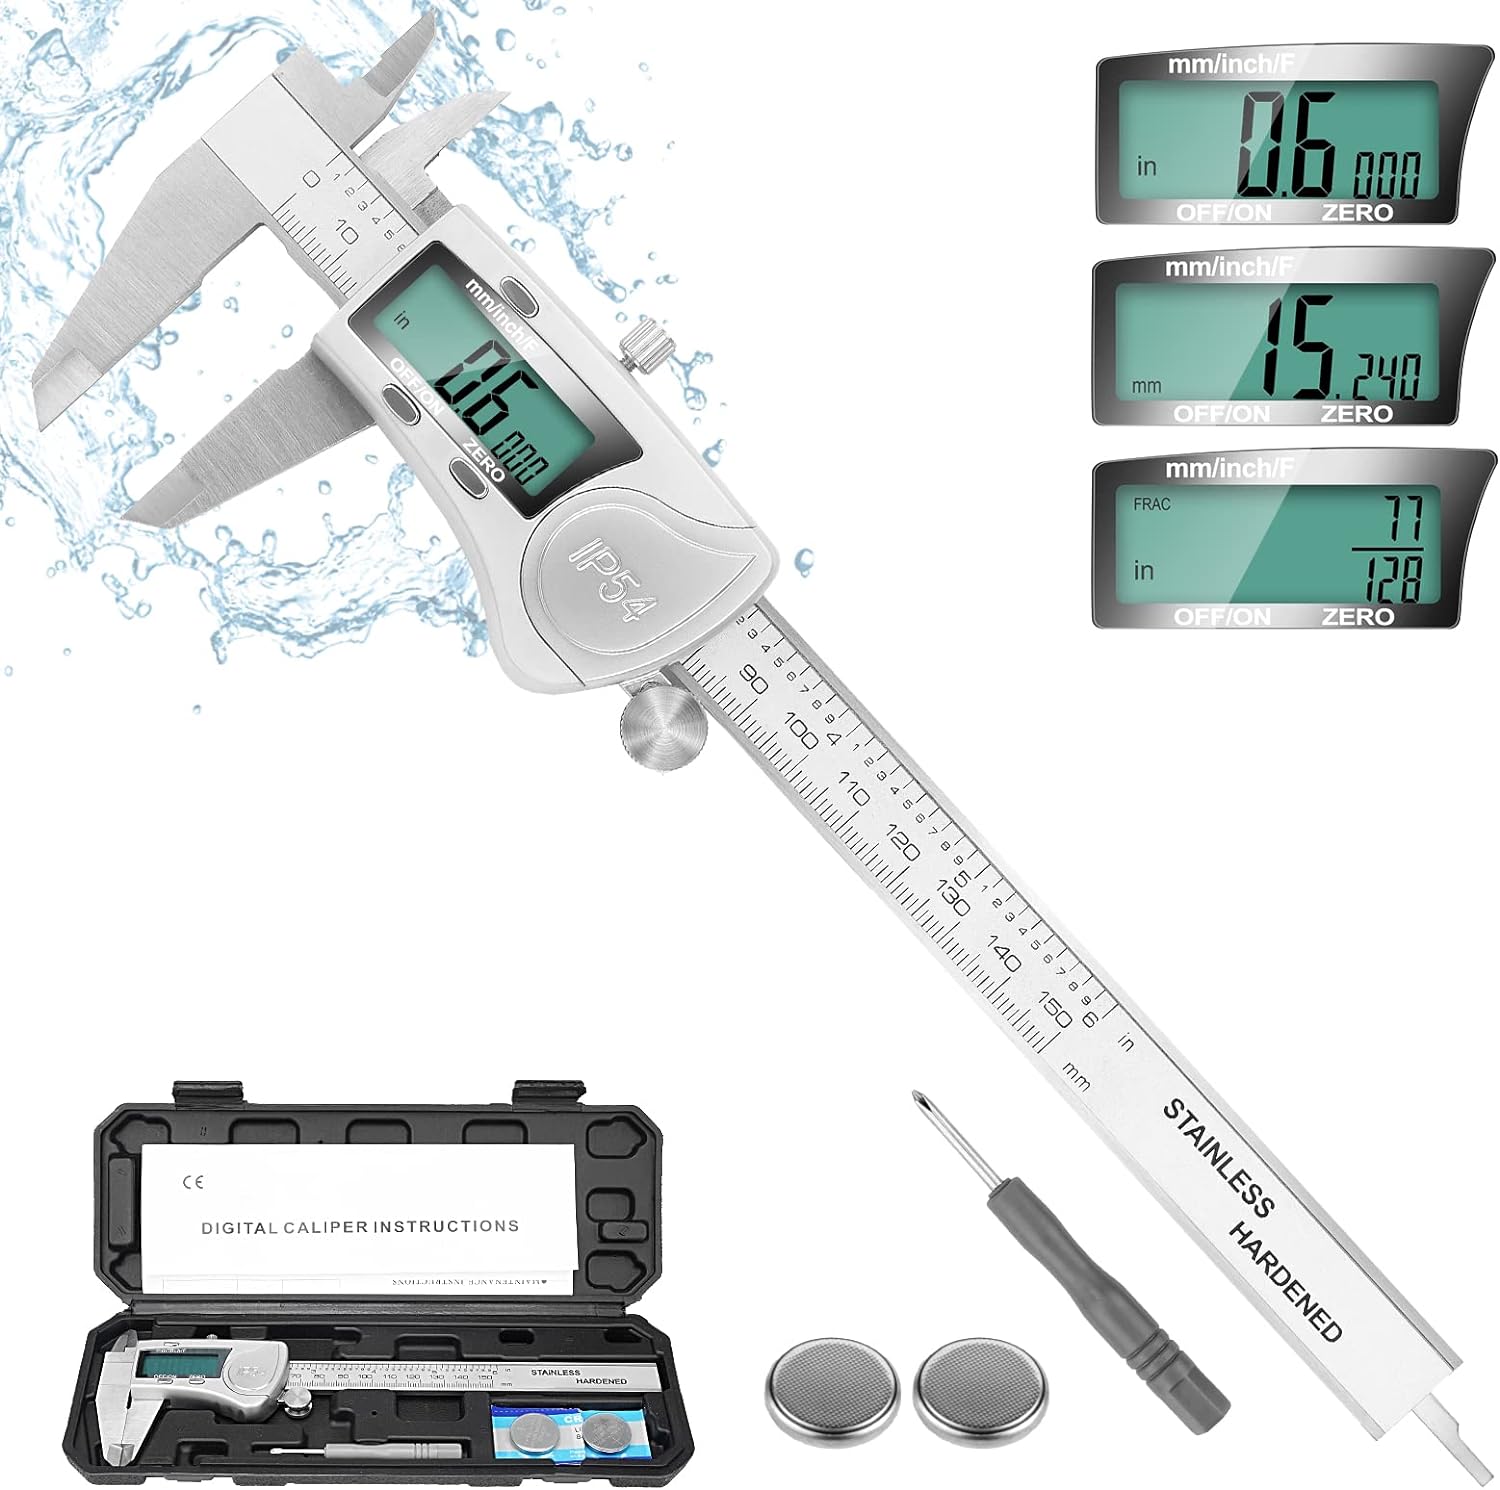 Digital Caliper Measuring Tool, IP54 Waterproof Electronic Micrometer Caliper, Stainlee Steel Vernier Caliper with Large LCD Screen, Inch Metric Fraction Conversion, 6 Inch for Household/DIY